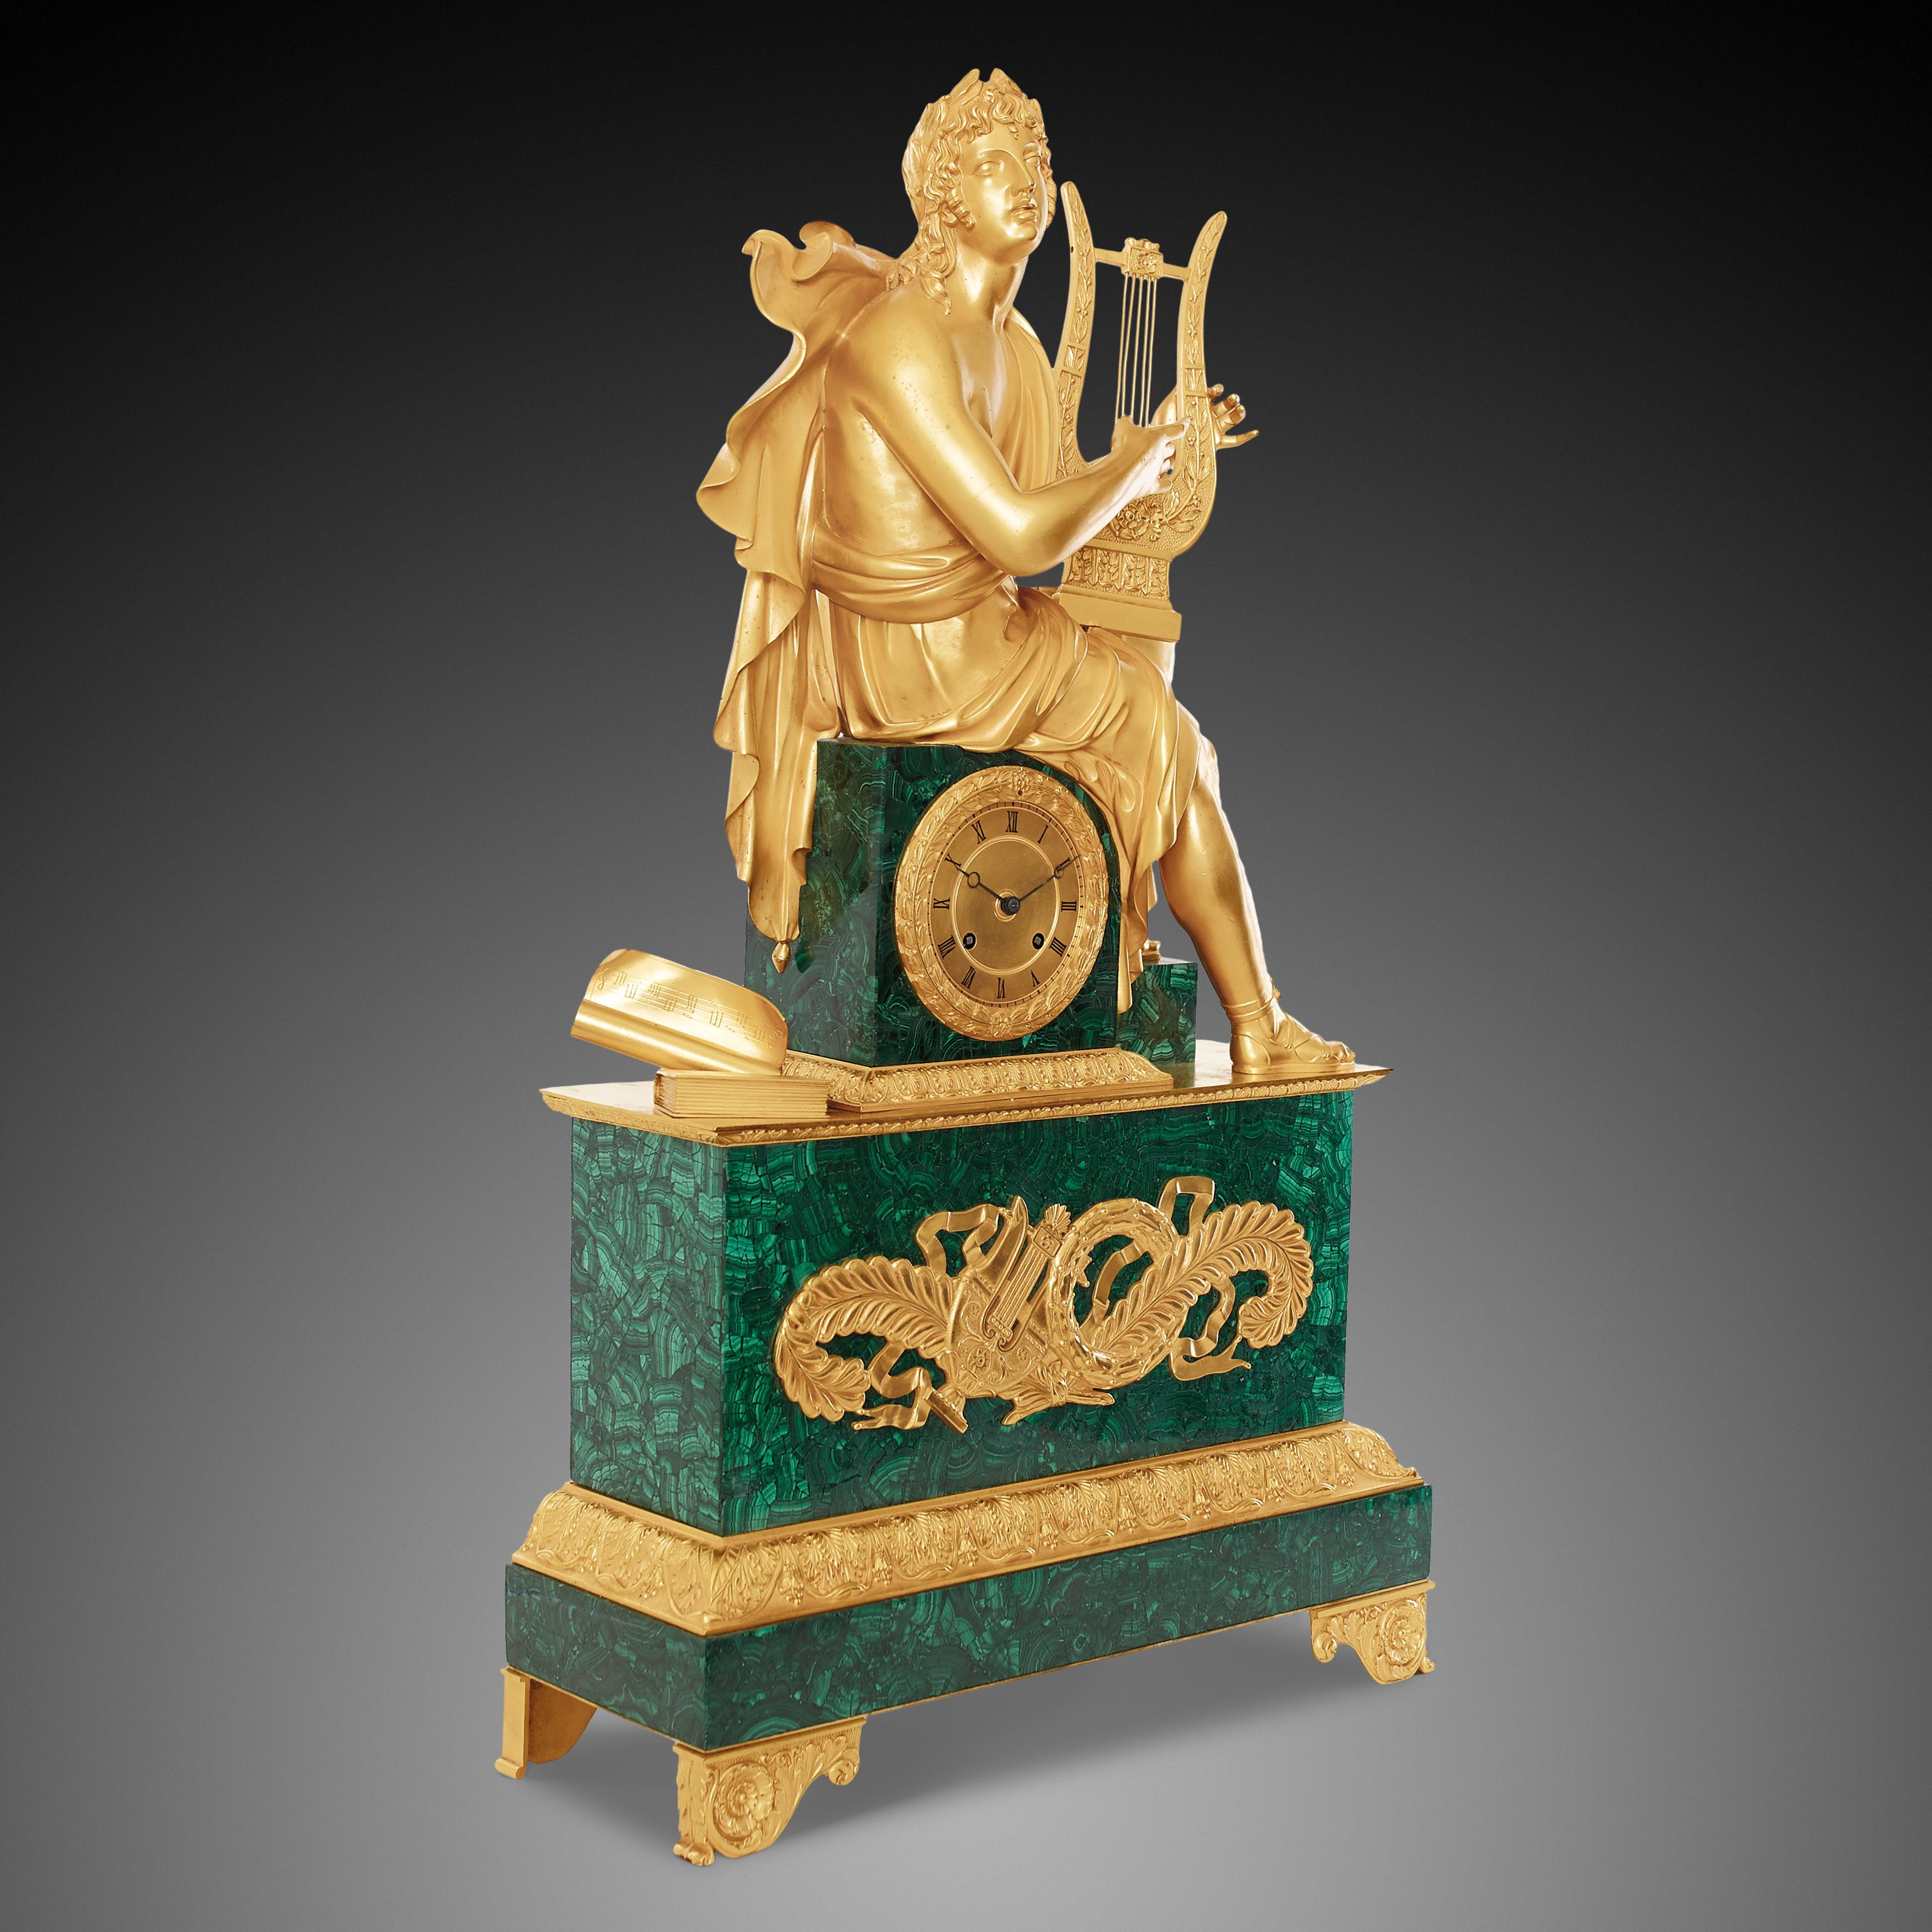 Mantel clock 19th century Louis Philippe Charles X period ormolu pendulum with malachite plinth. This stunning clock is surmounted by a gilded bronze figure of a Greek god – Apollo playing on a lyre, seated on the malachite square clock case draped